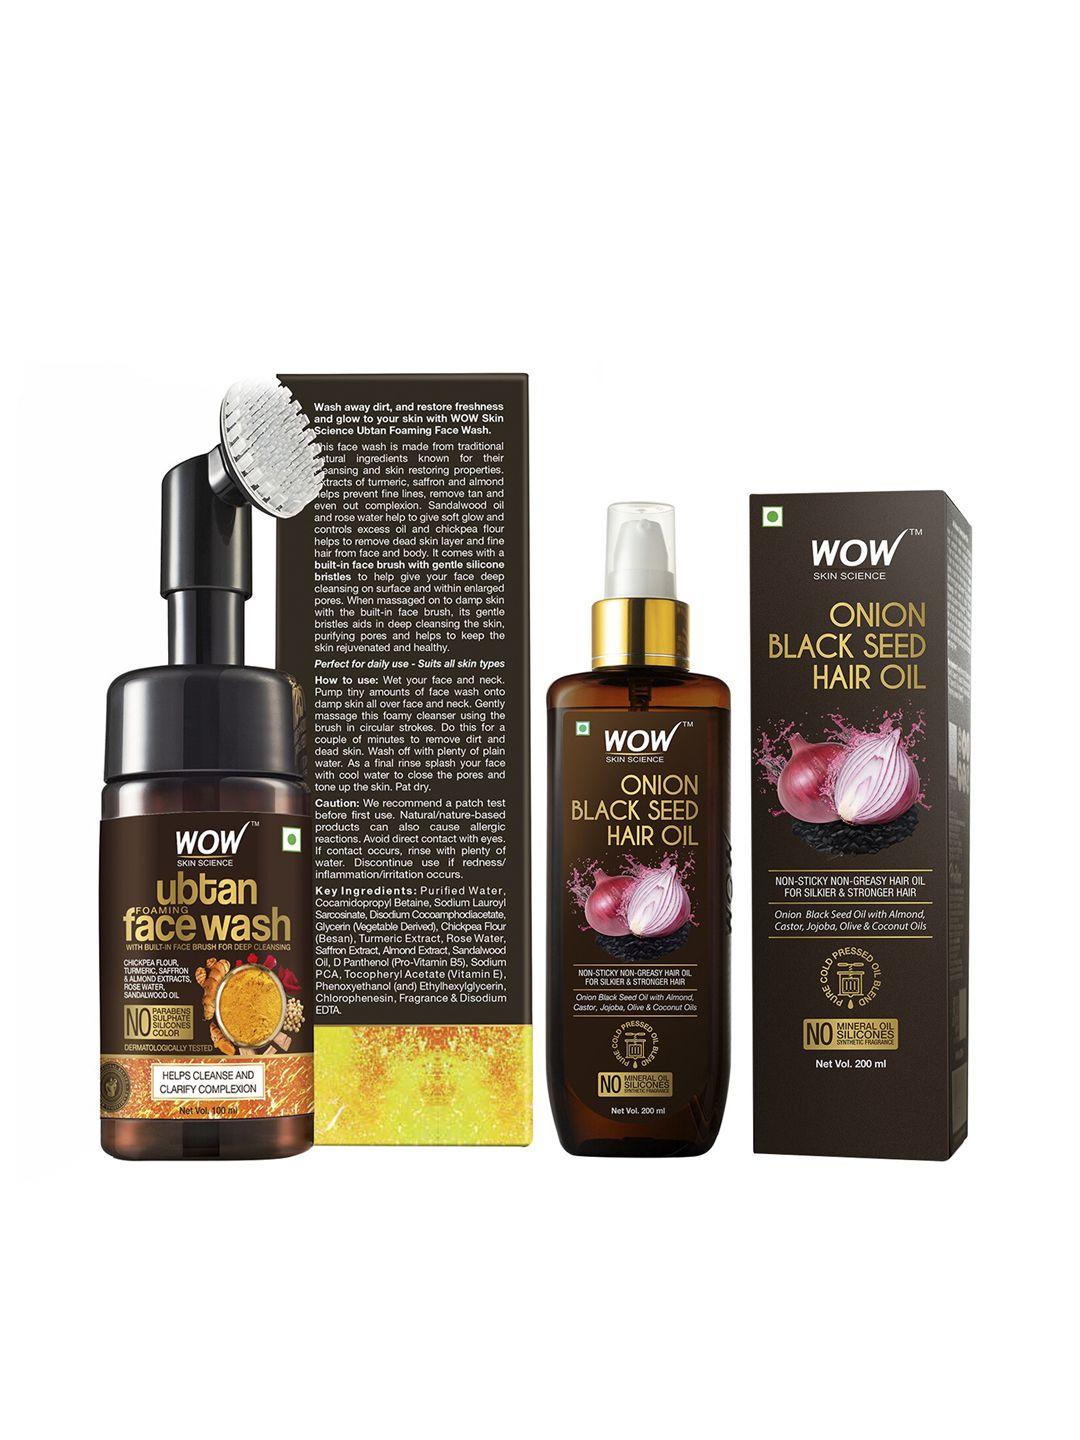 wow-skin-science-set-of-onion-black-seed-hair-oil-&-ubtan-foaming-face-wash